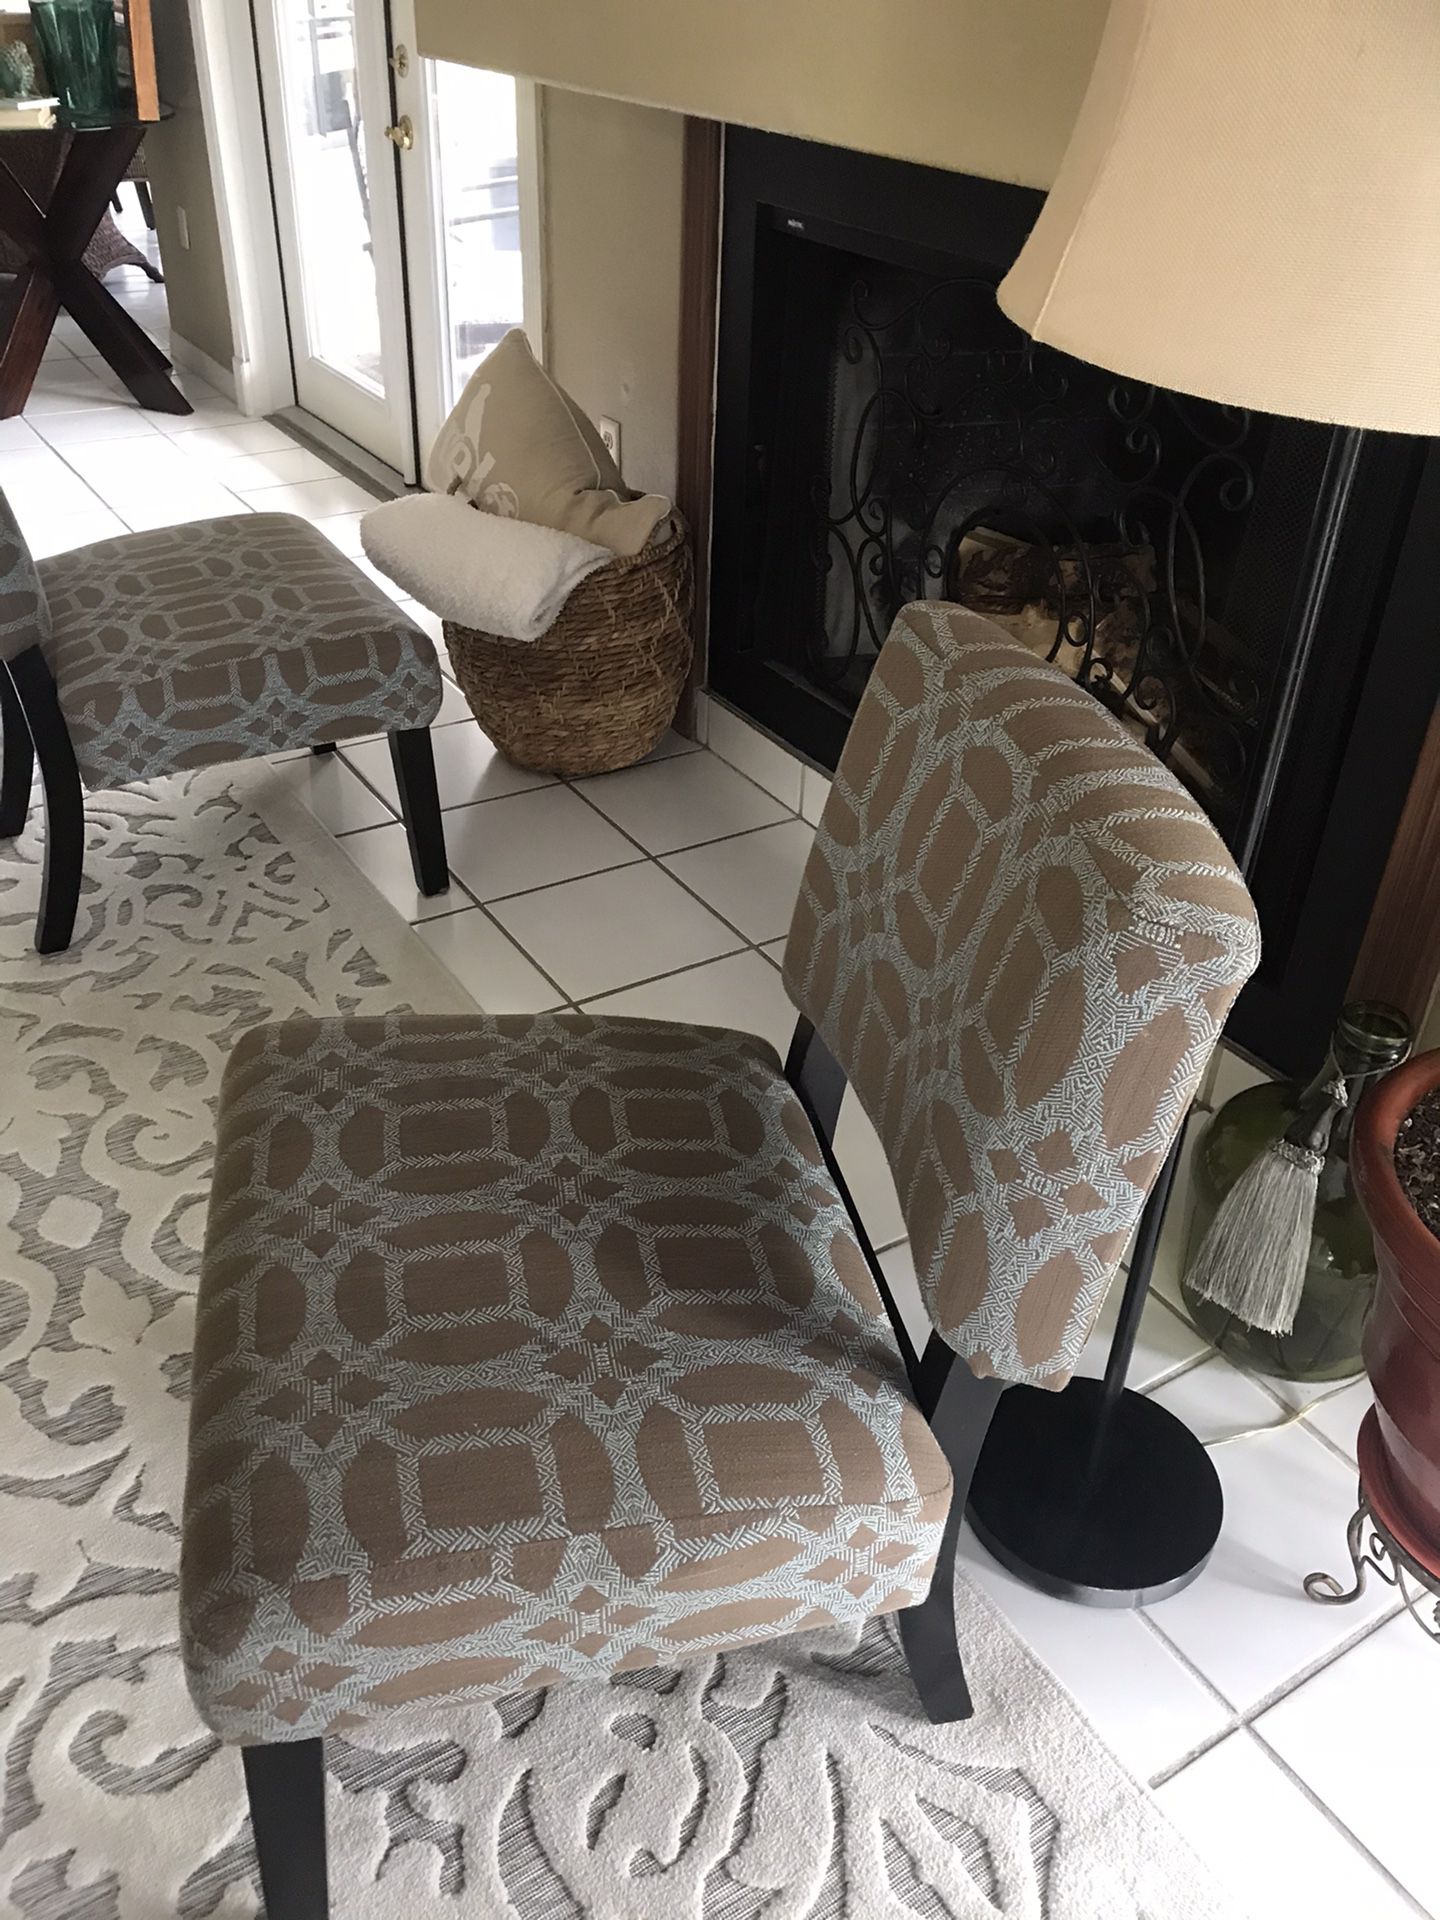 Accent Chairs (2)